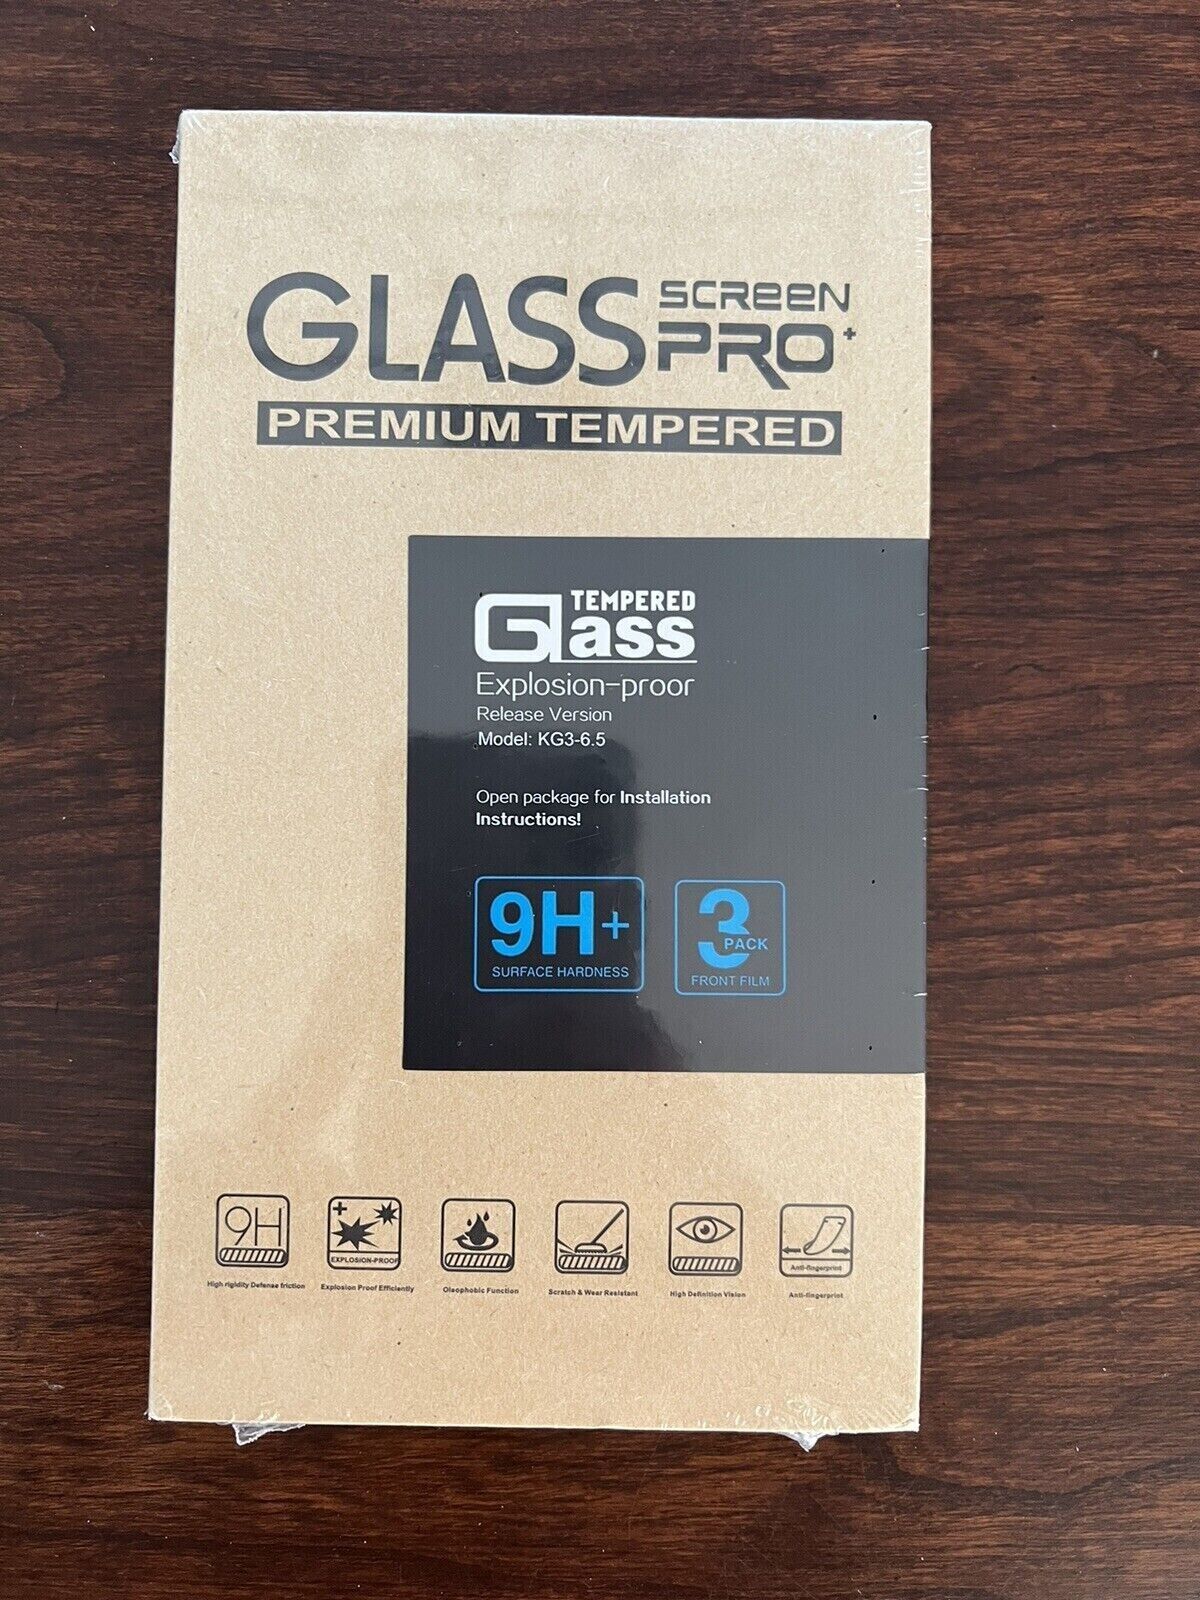 3 Pack Screen Protector Glass Screen Pro For iPhone XR11 KG3-6.5 